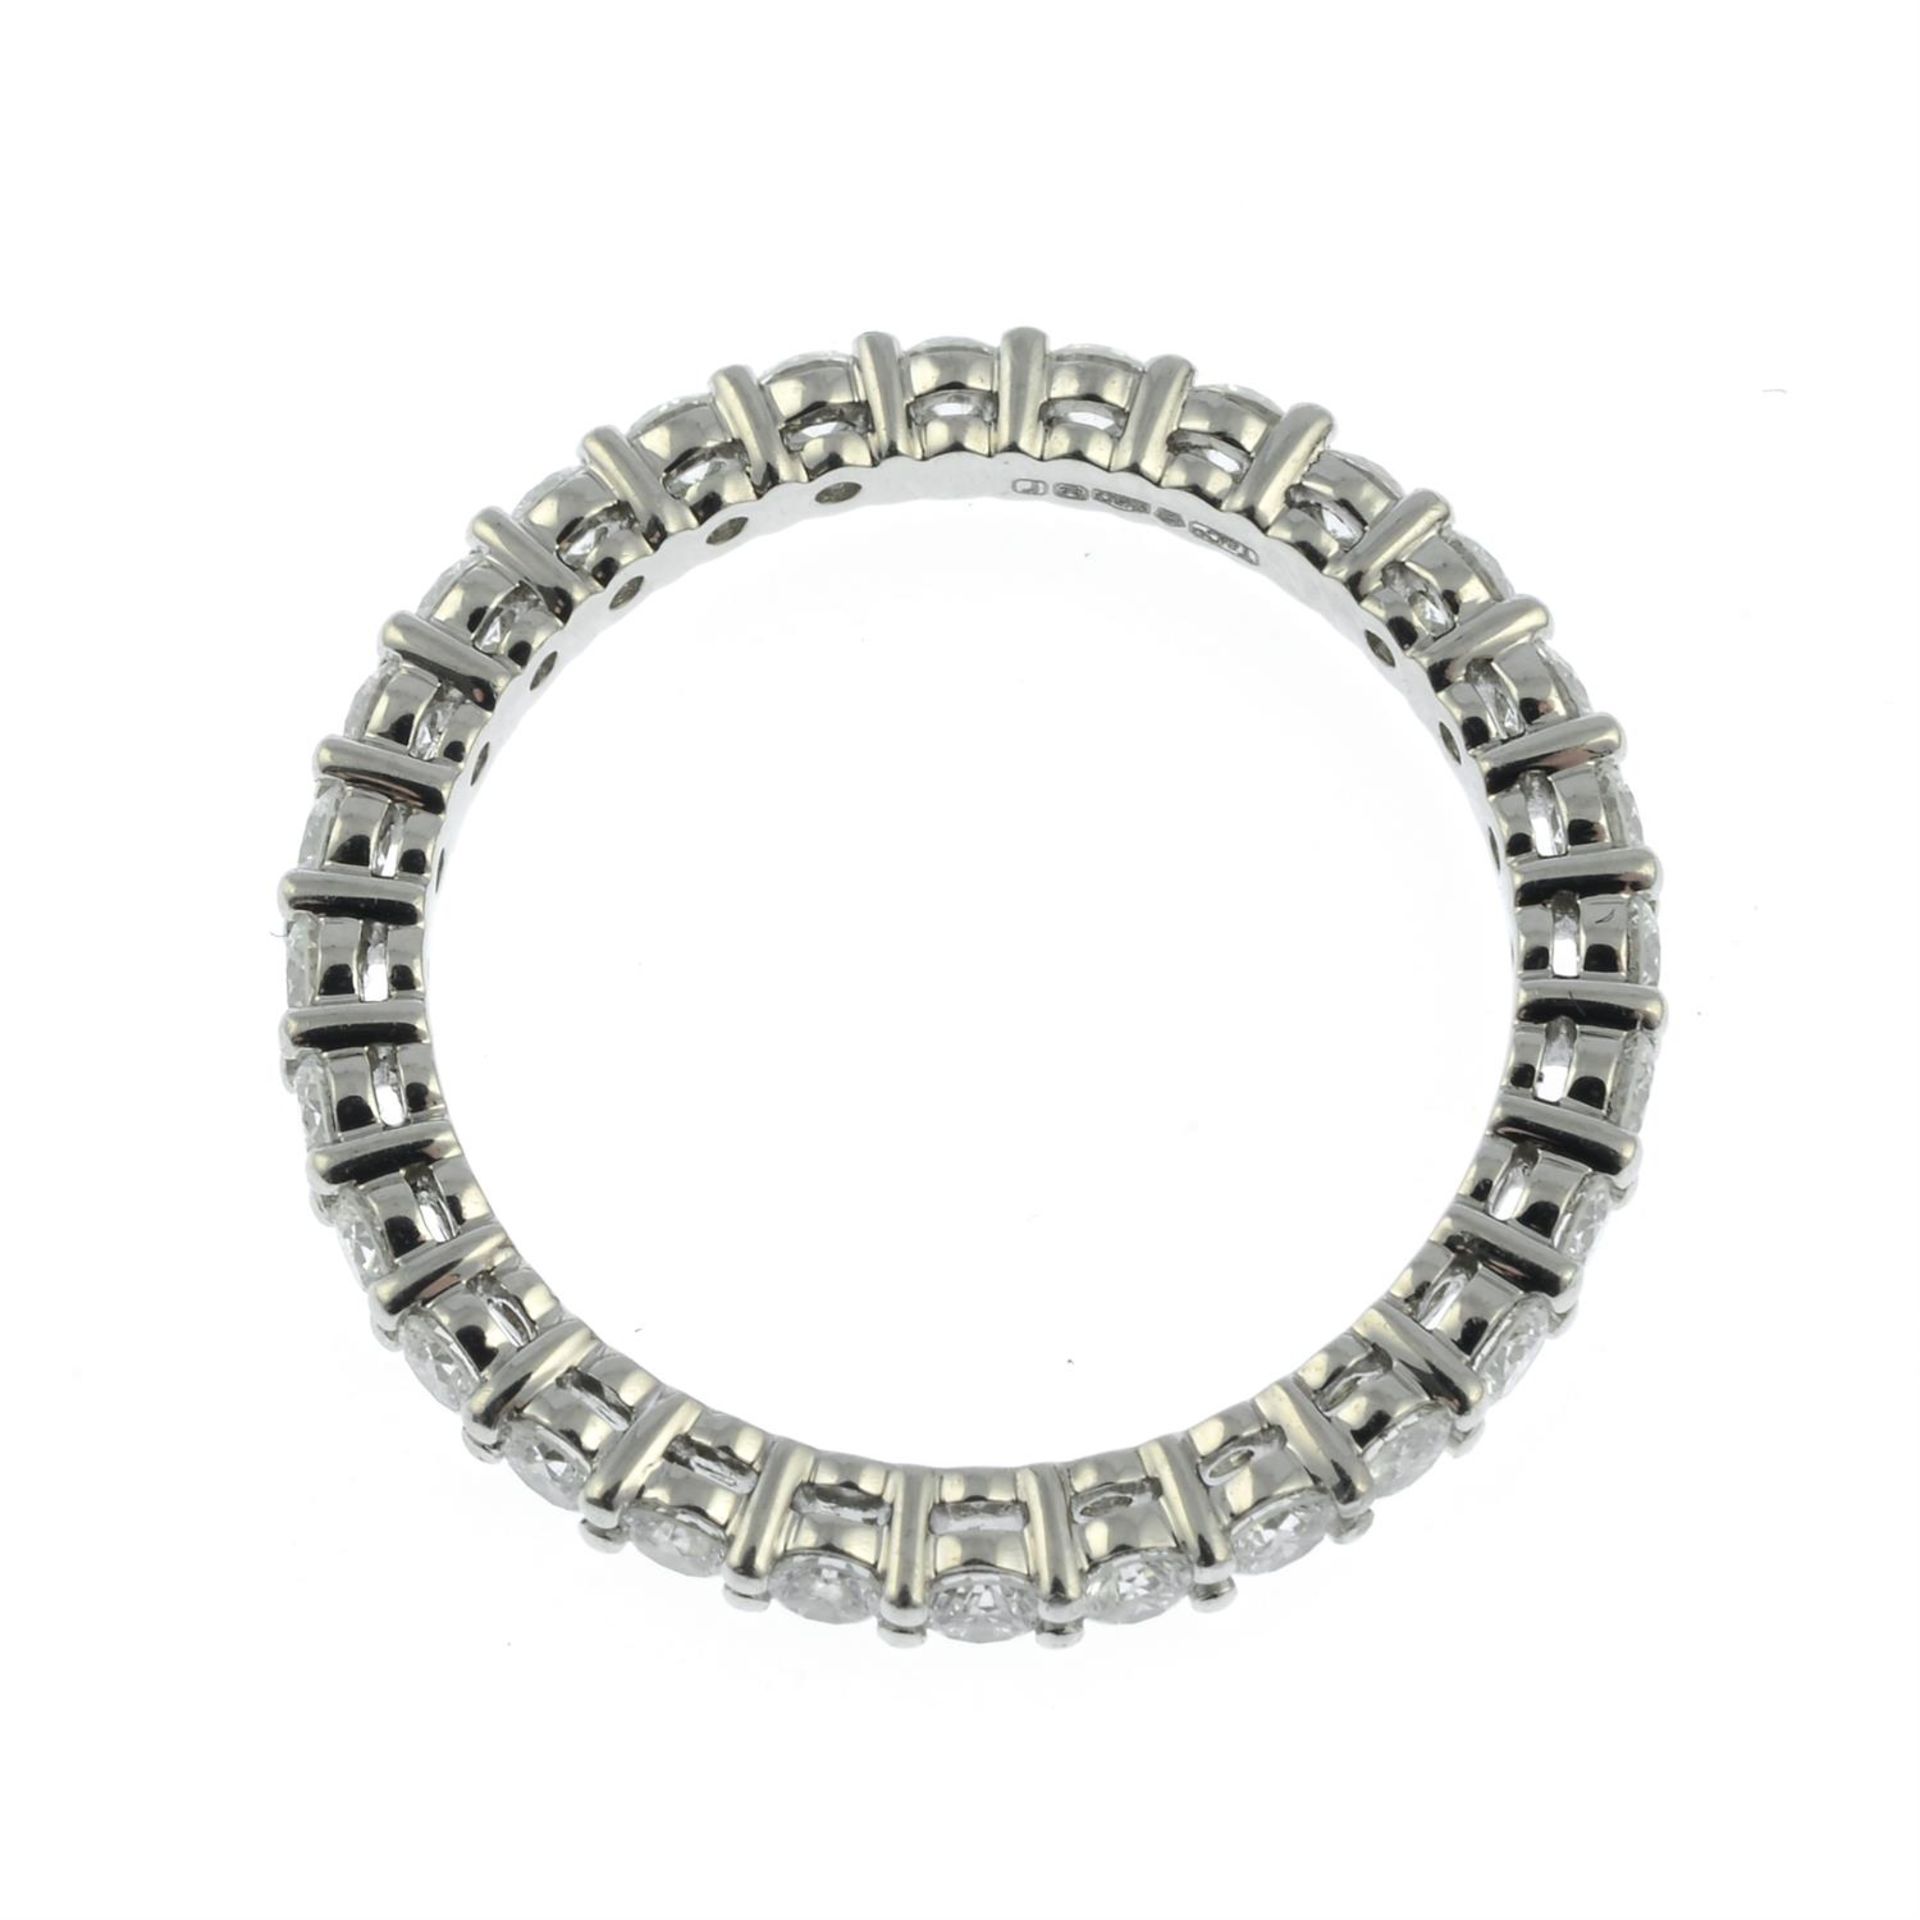 A platinum brilliant-cut diamond 'Embrace' full eternity ring, by Tiffany & Co. - Image 4 of 5